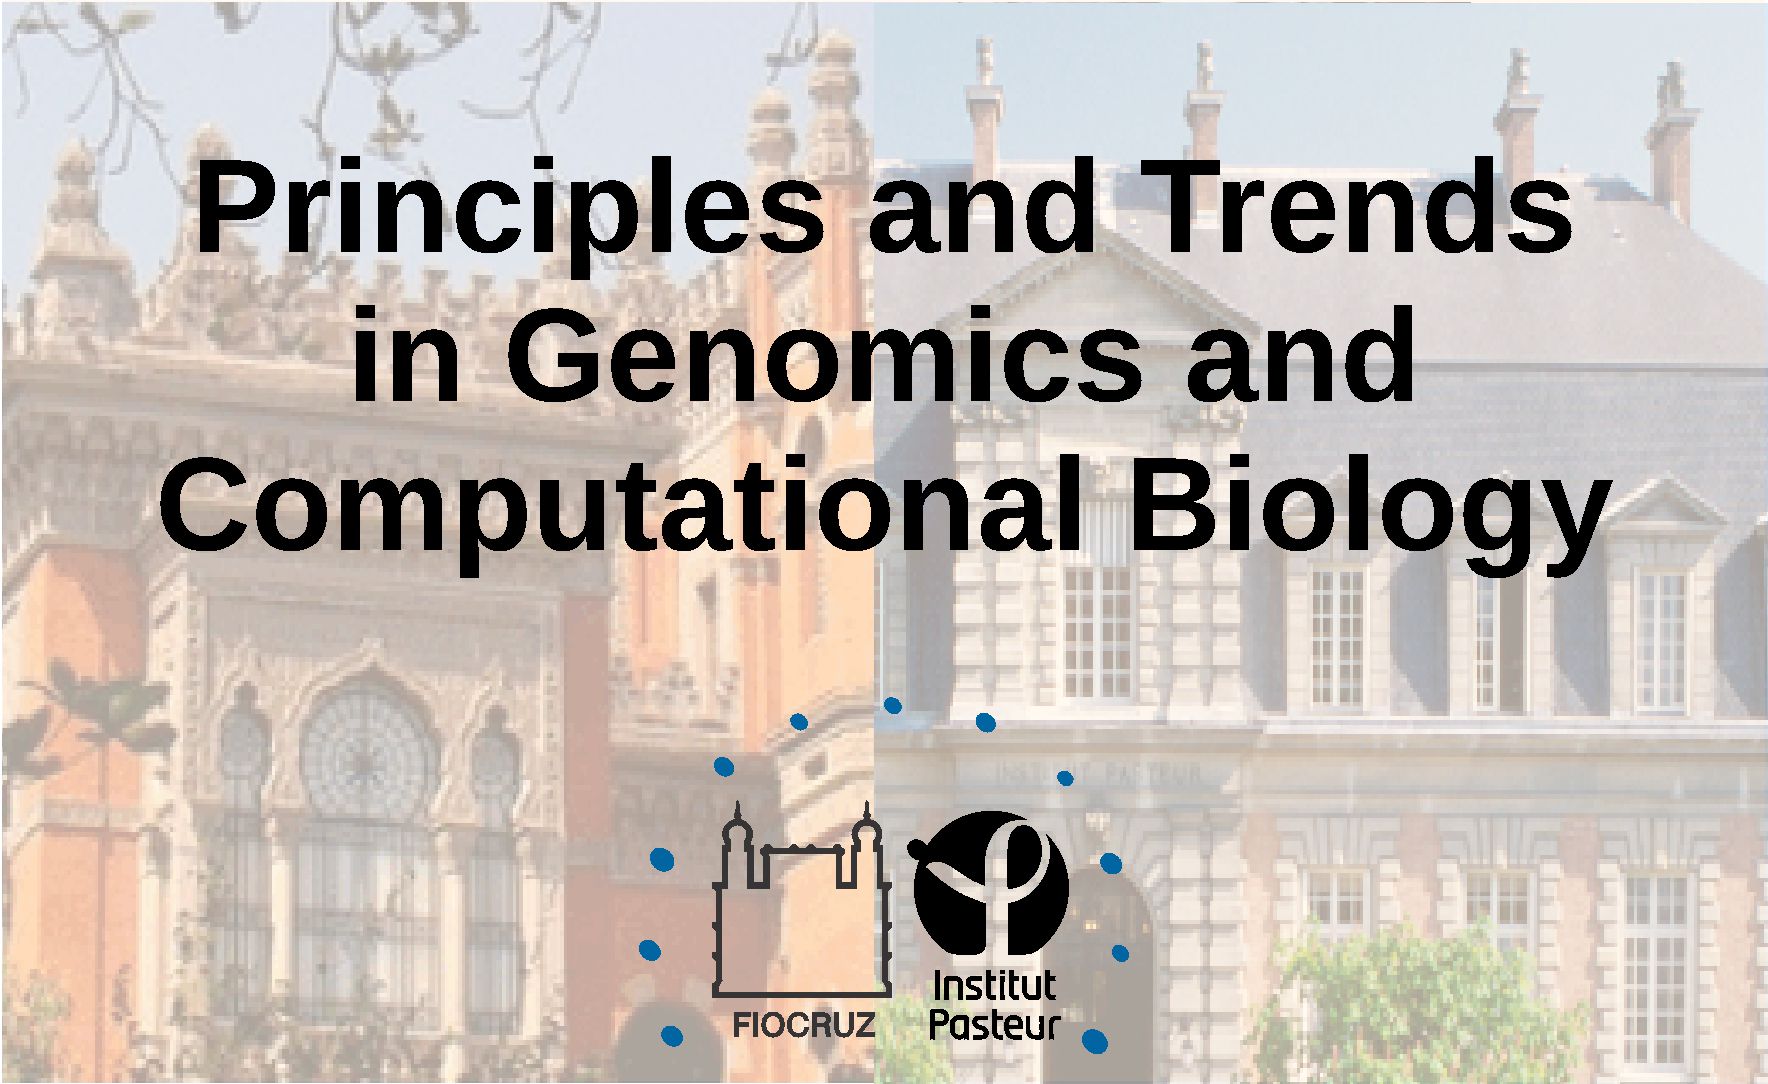 Principles and Trends in Genomics and Computational Biology 01